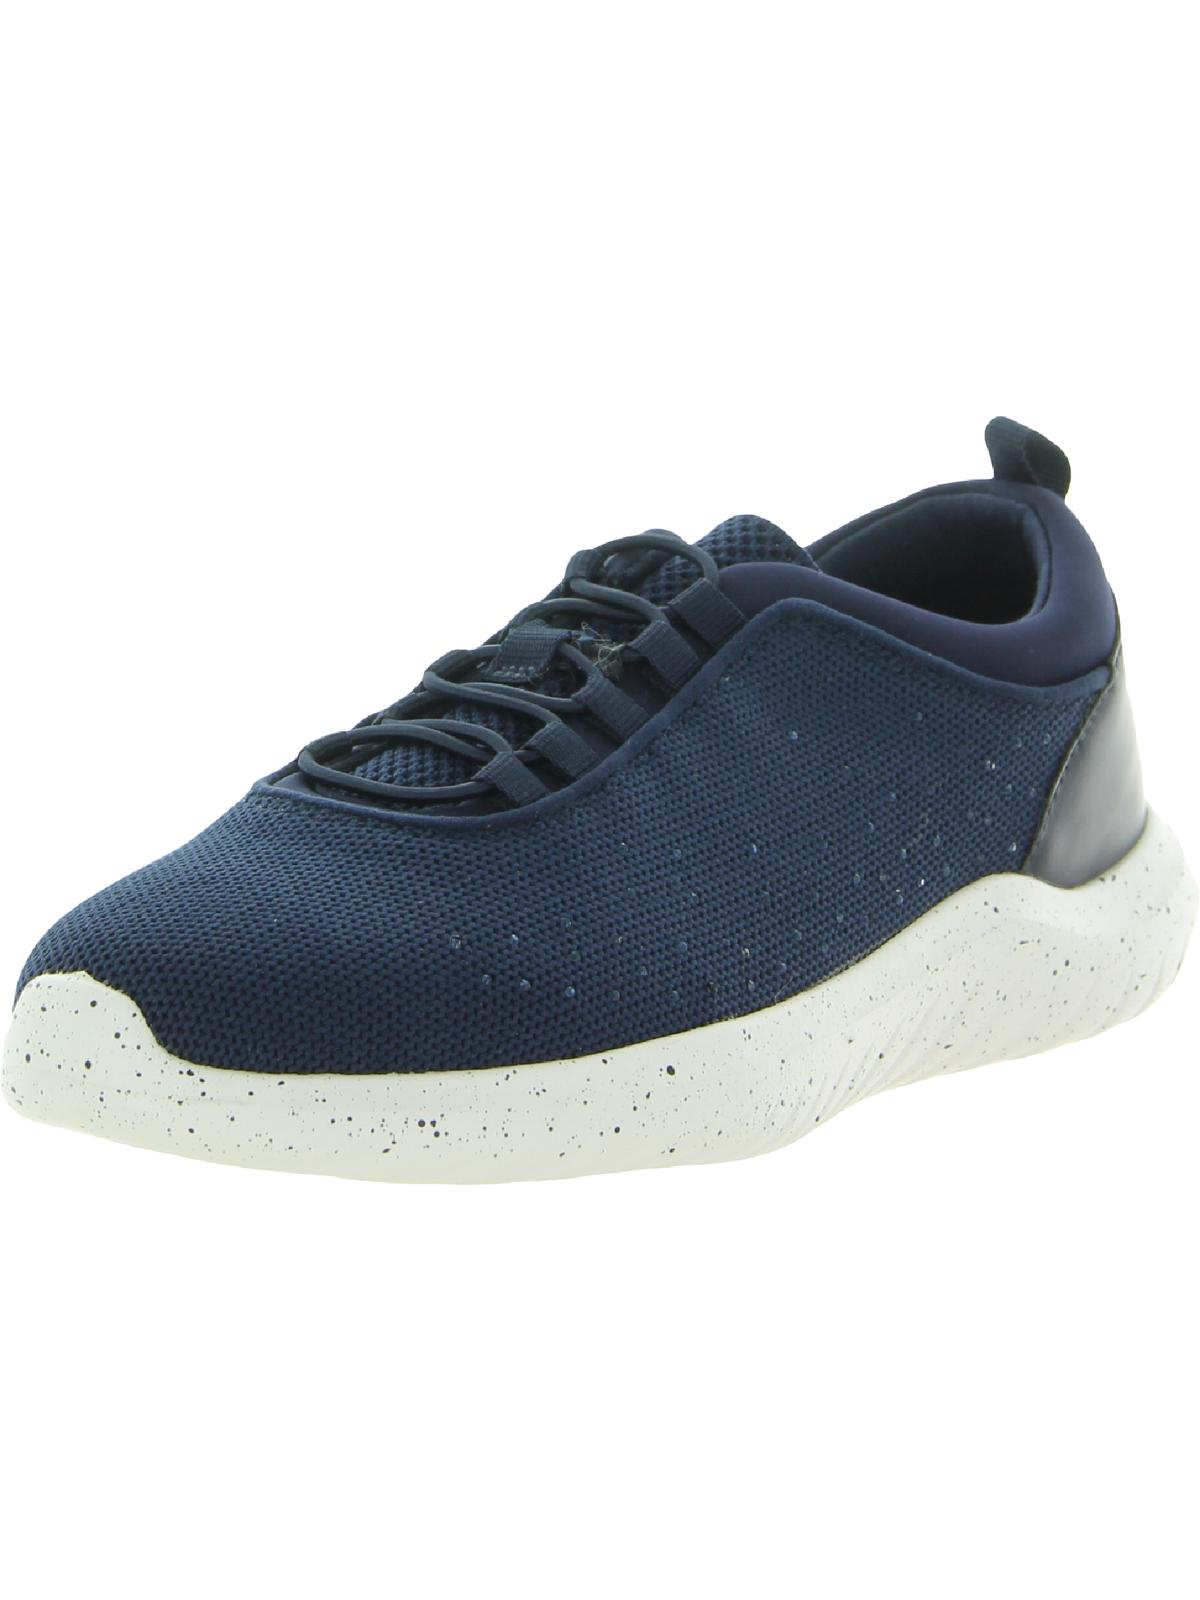 Shop Cloudsteppers By Clarks Nova Step Womens Rhinestone Fitness Athletic And Training Shoes In Blue